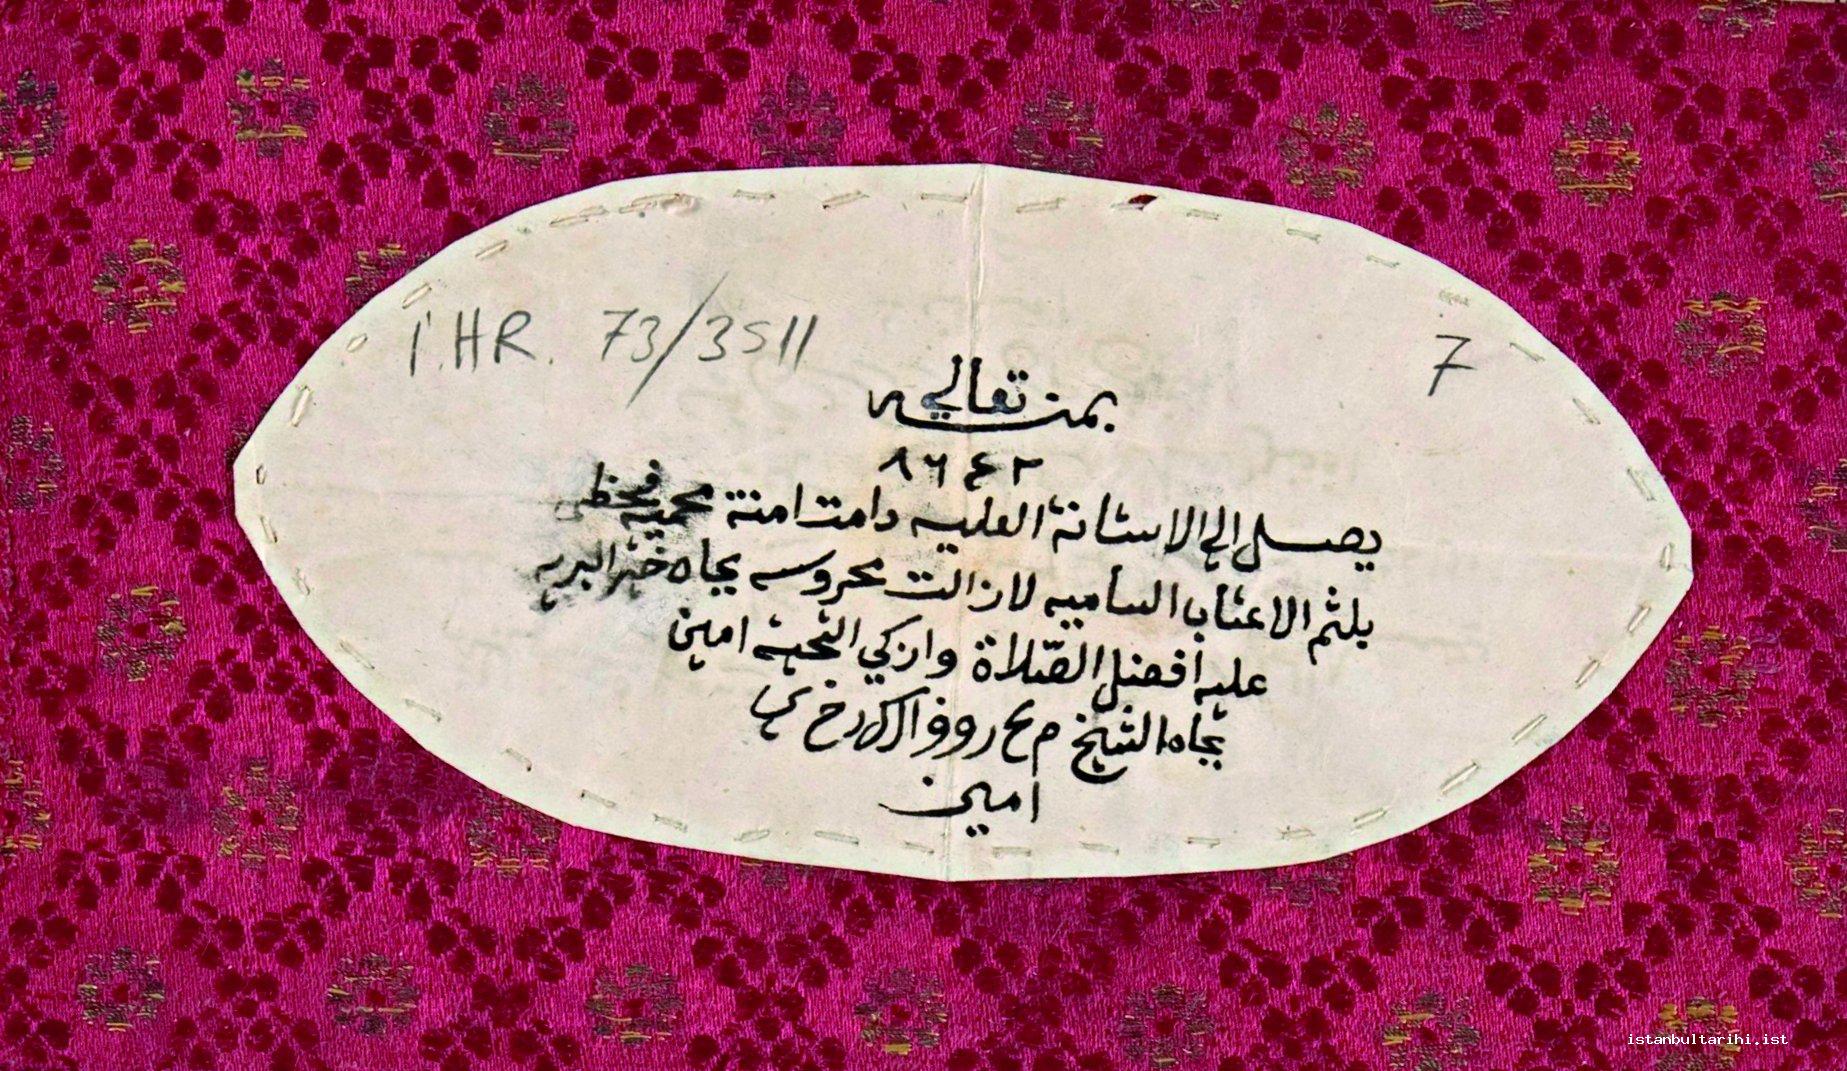 4- Aceh ruler Mansur’s letter and its envelope dated 27 March 1850 requesting help from Istanbul against the Netherlands (BOA İ.HR., no. 73/3511) B